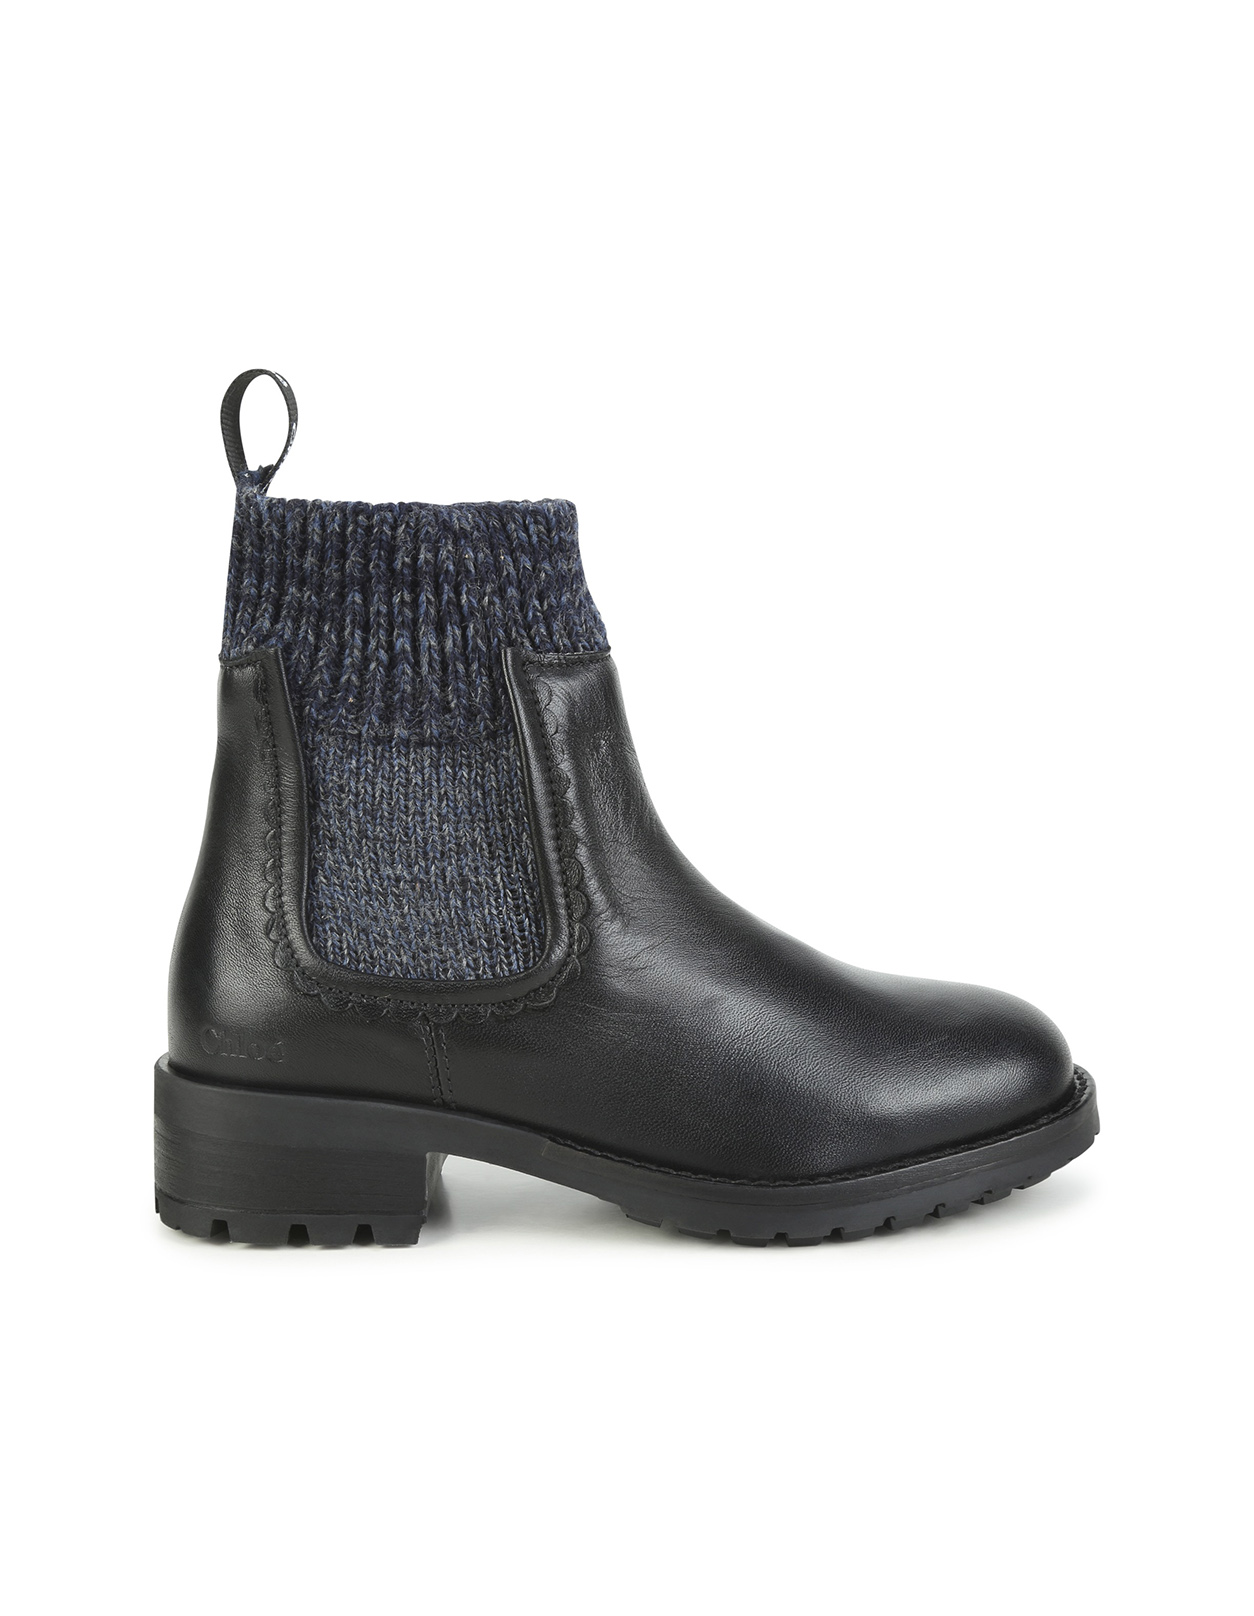 Black Leather Ankle Boots With Navy Blue Sock Insert - Chloé Kids ...